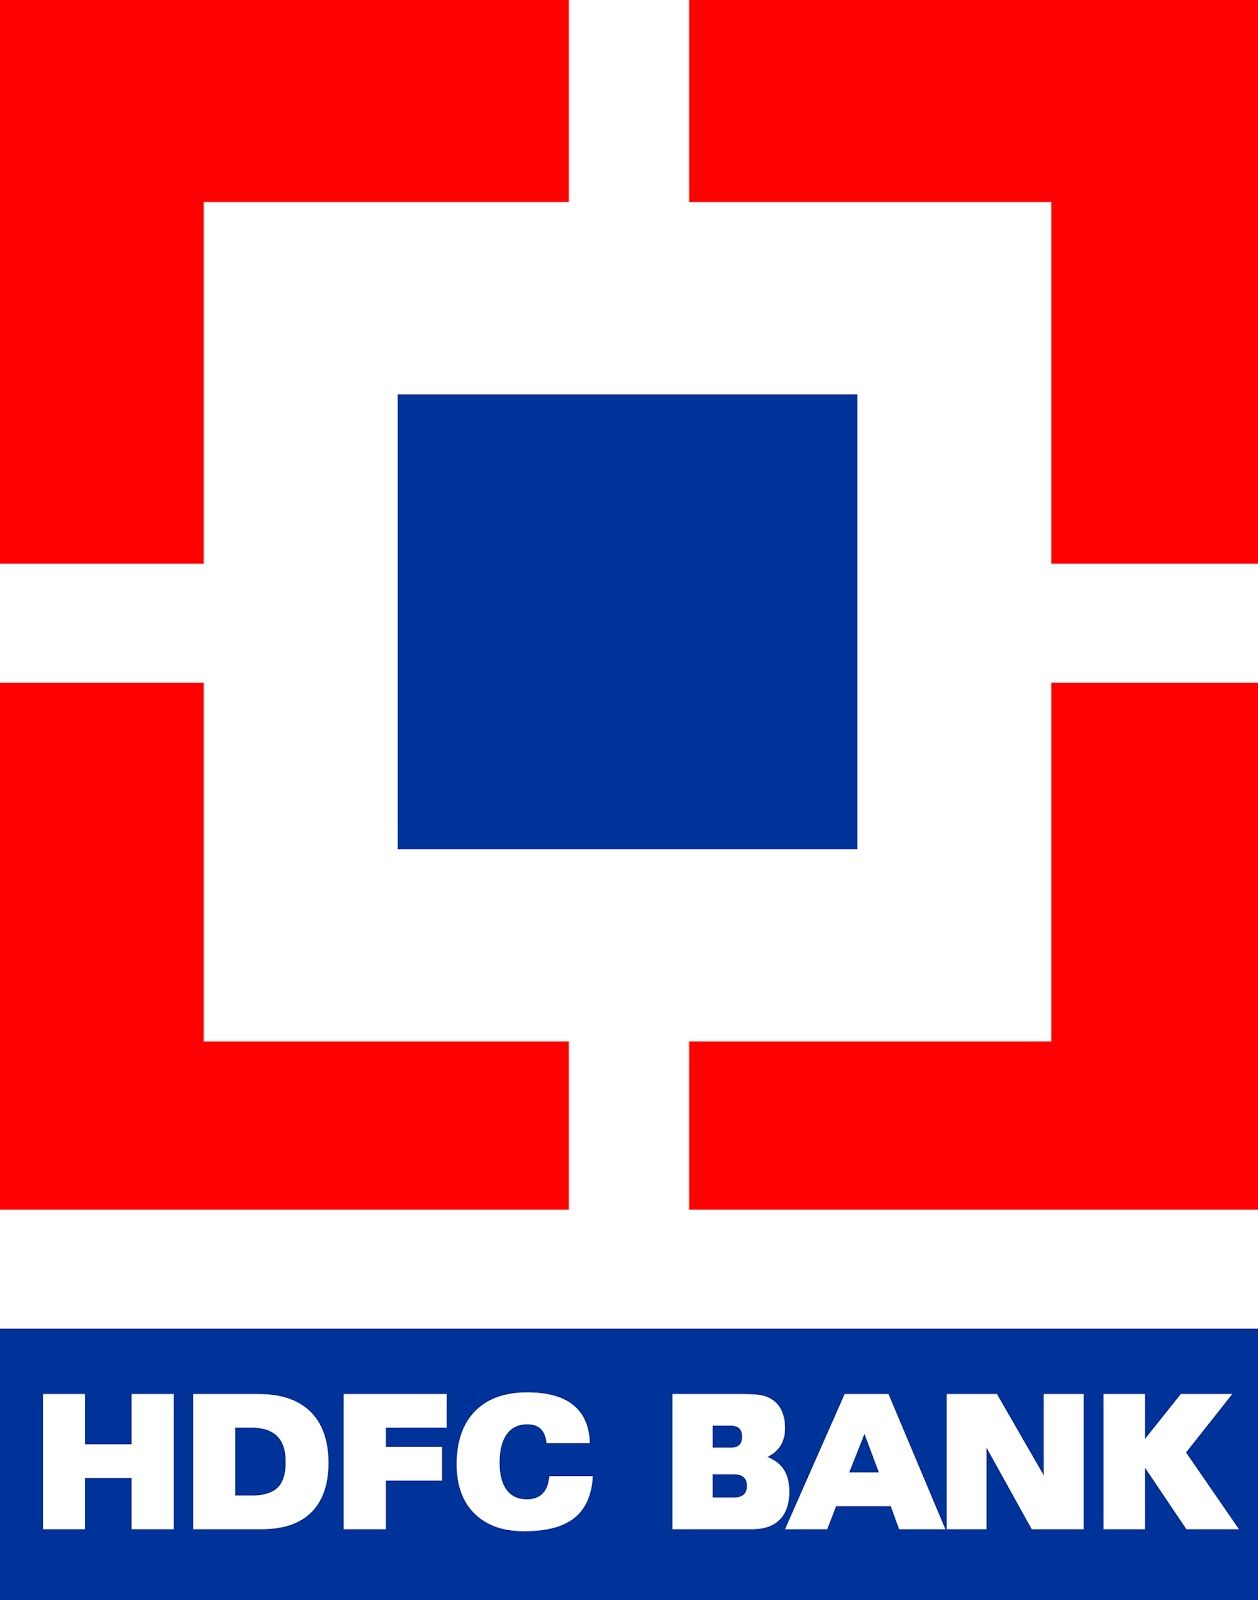 Merger between HDFC and HDFC Bank came into effect on July 1 